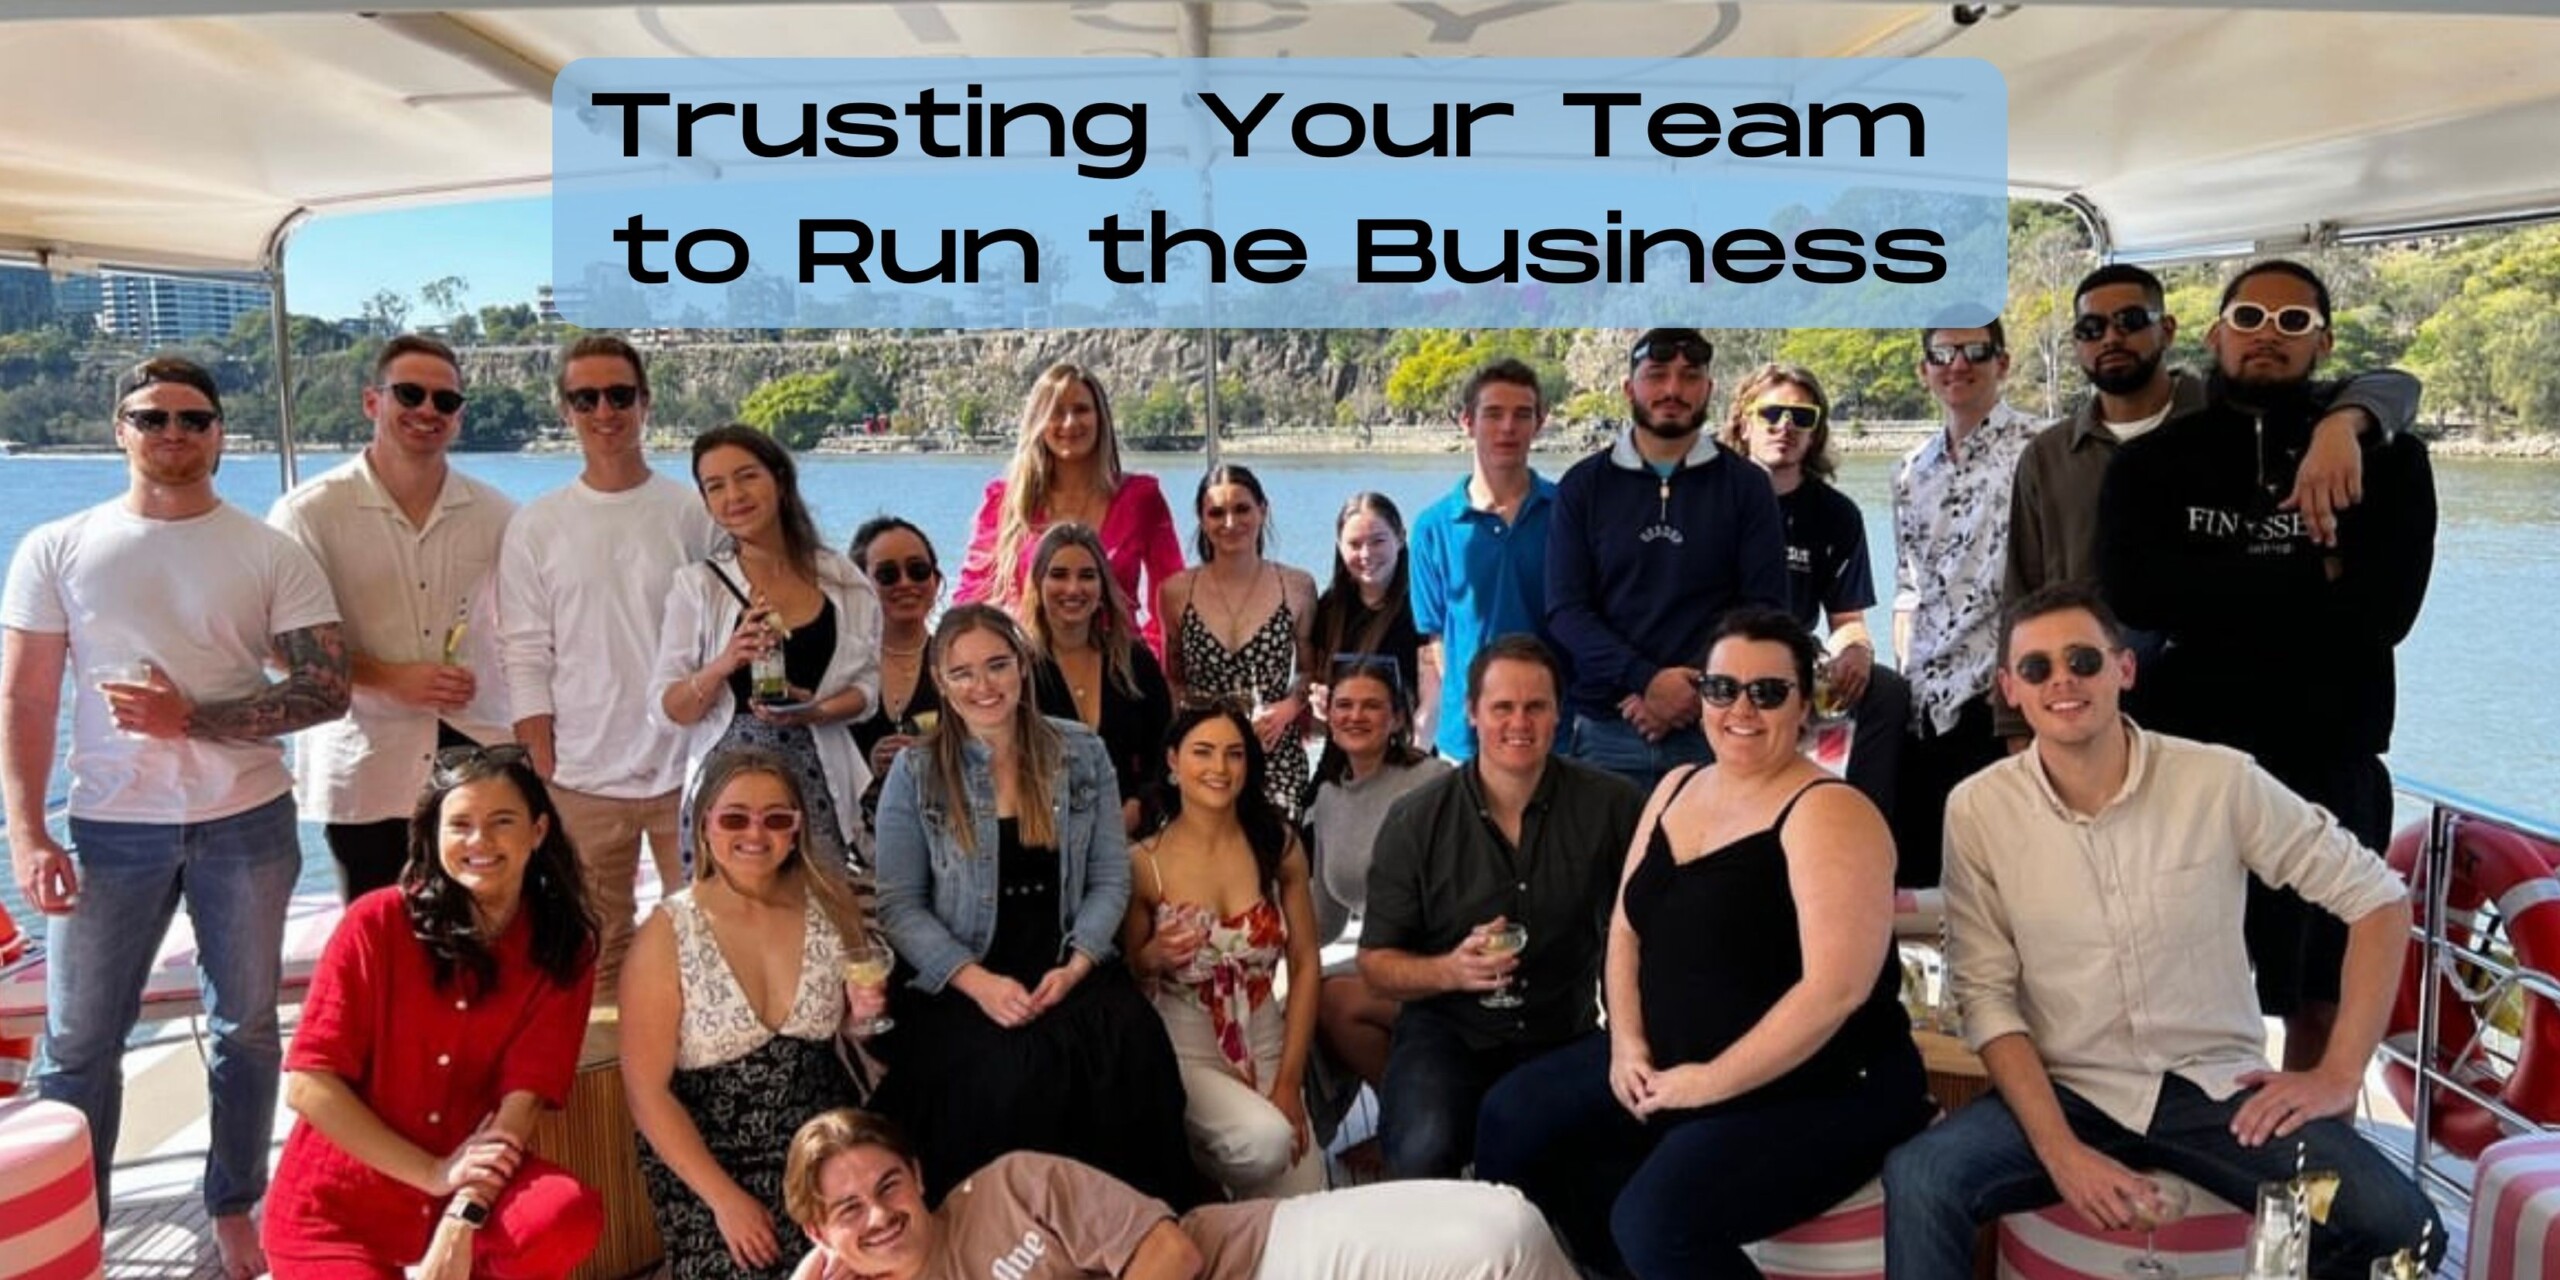 Trusting Your Team to Run the Business